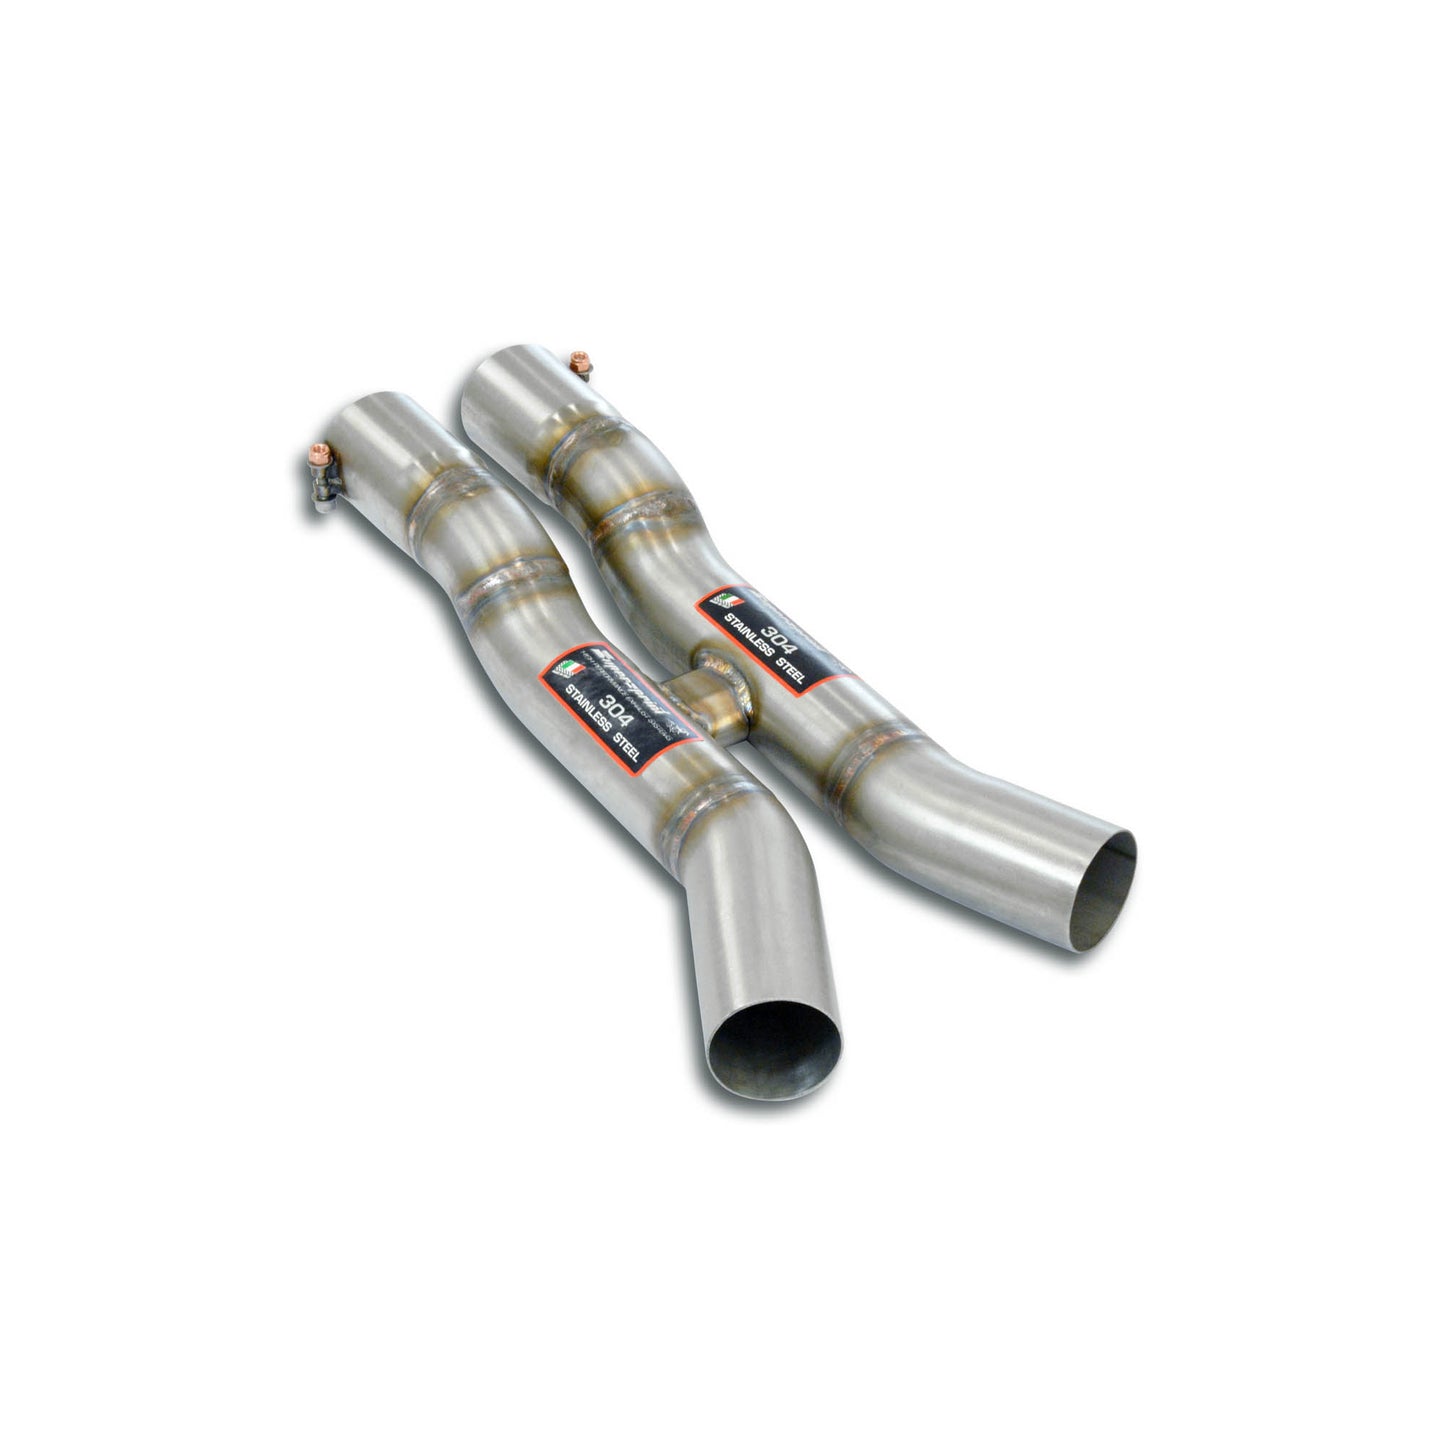 Supersprint G8X Center Pipes - J-Pipe G8x M3/M4